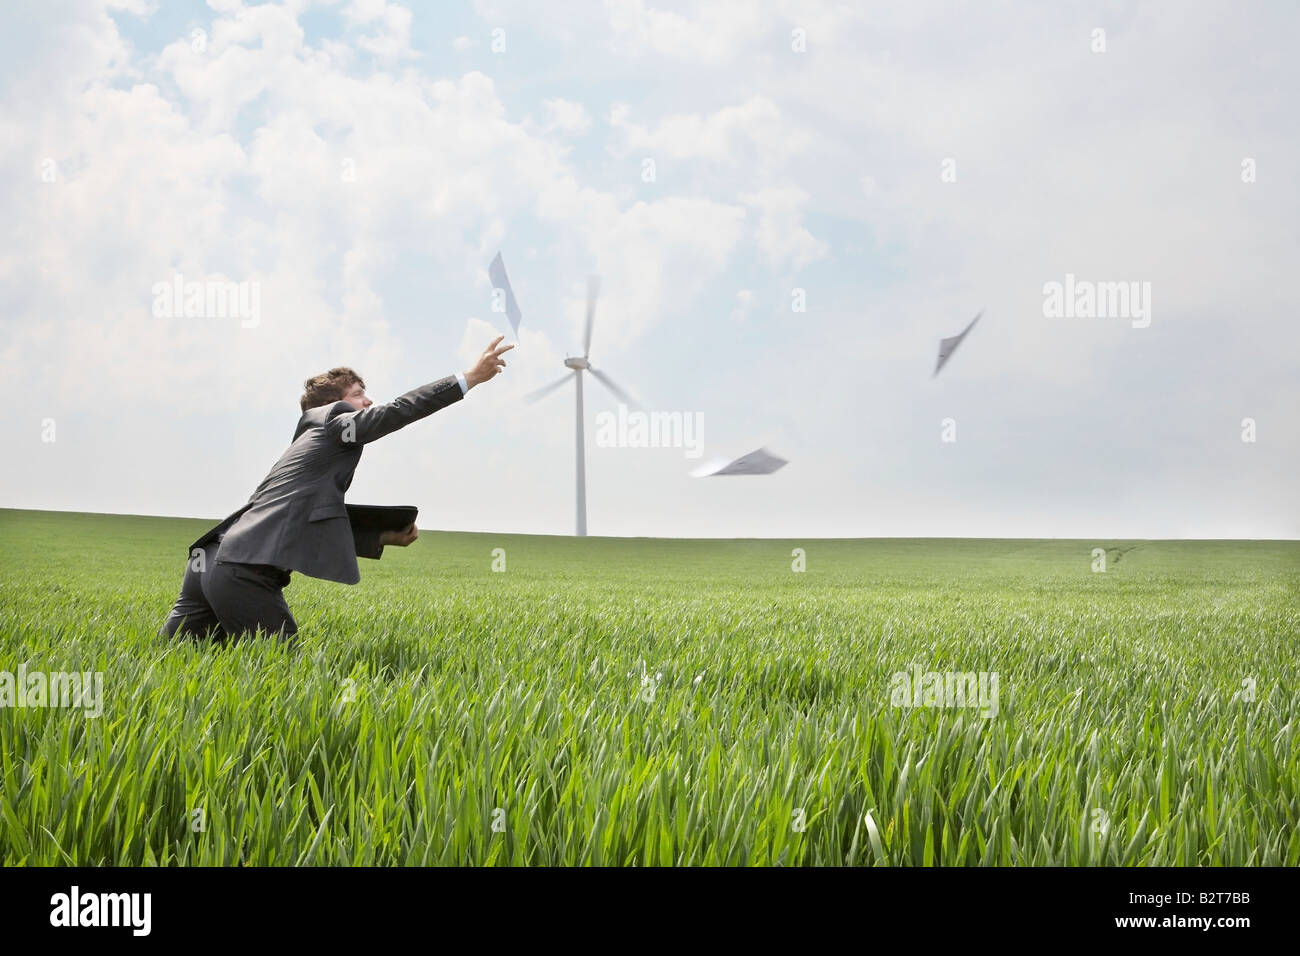 Man chasing papers on wind farm Banque D'Images